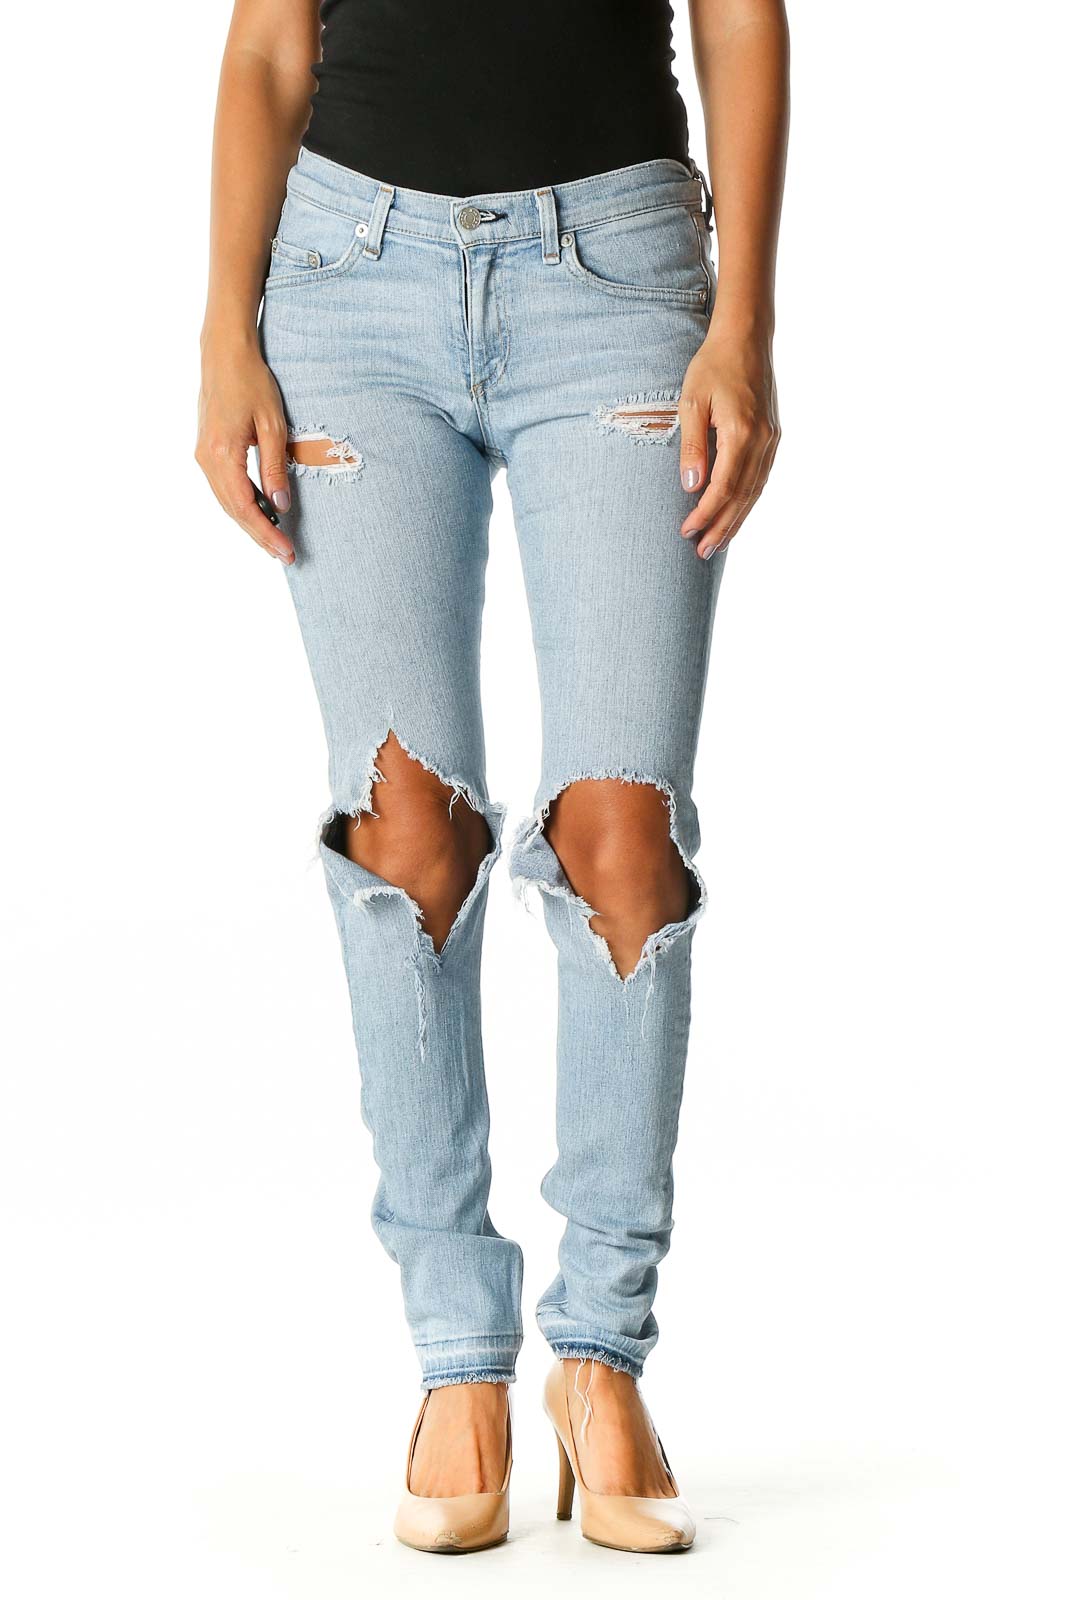 Grey Blue Ripped Light Rinse Jeans Front